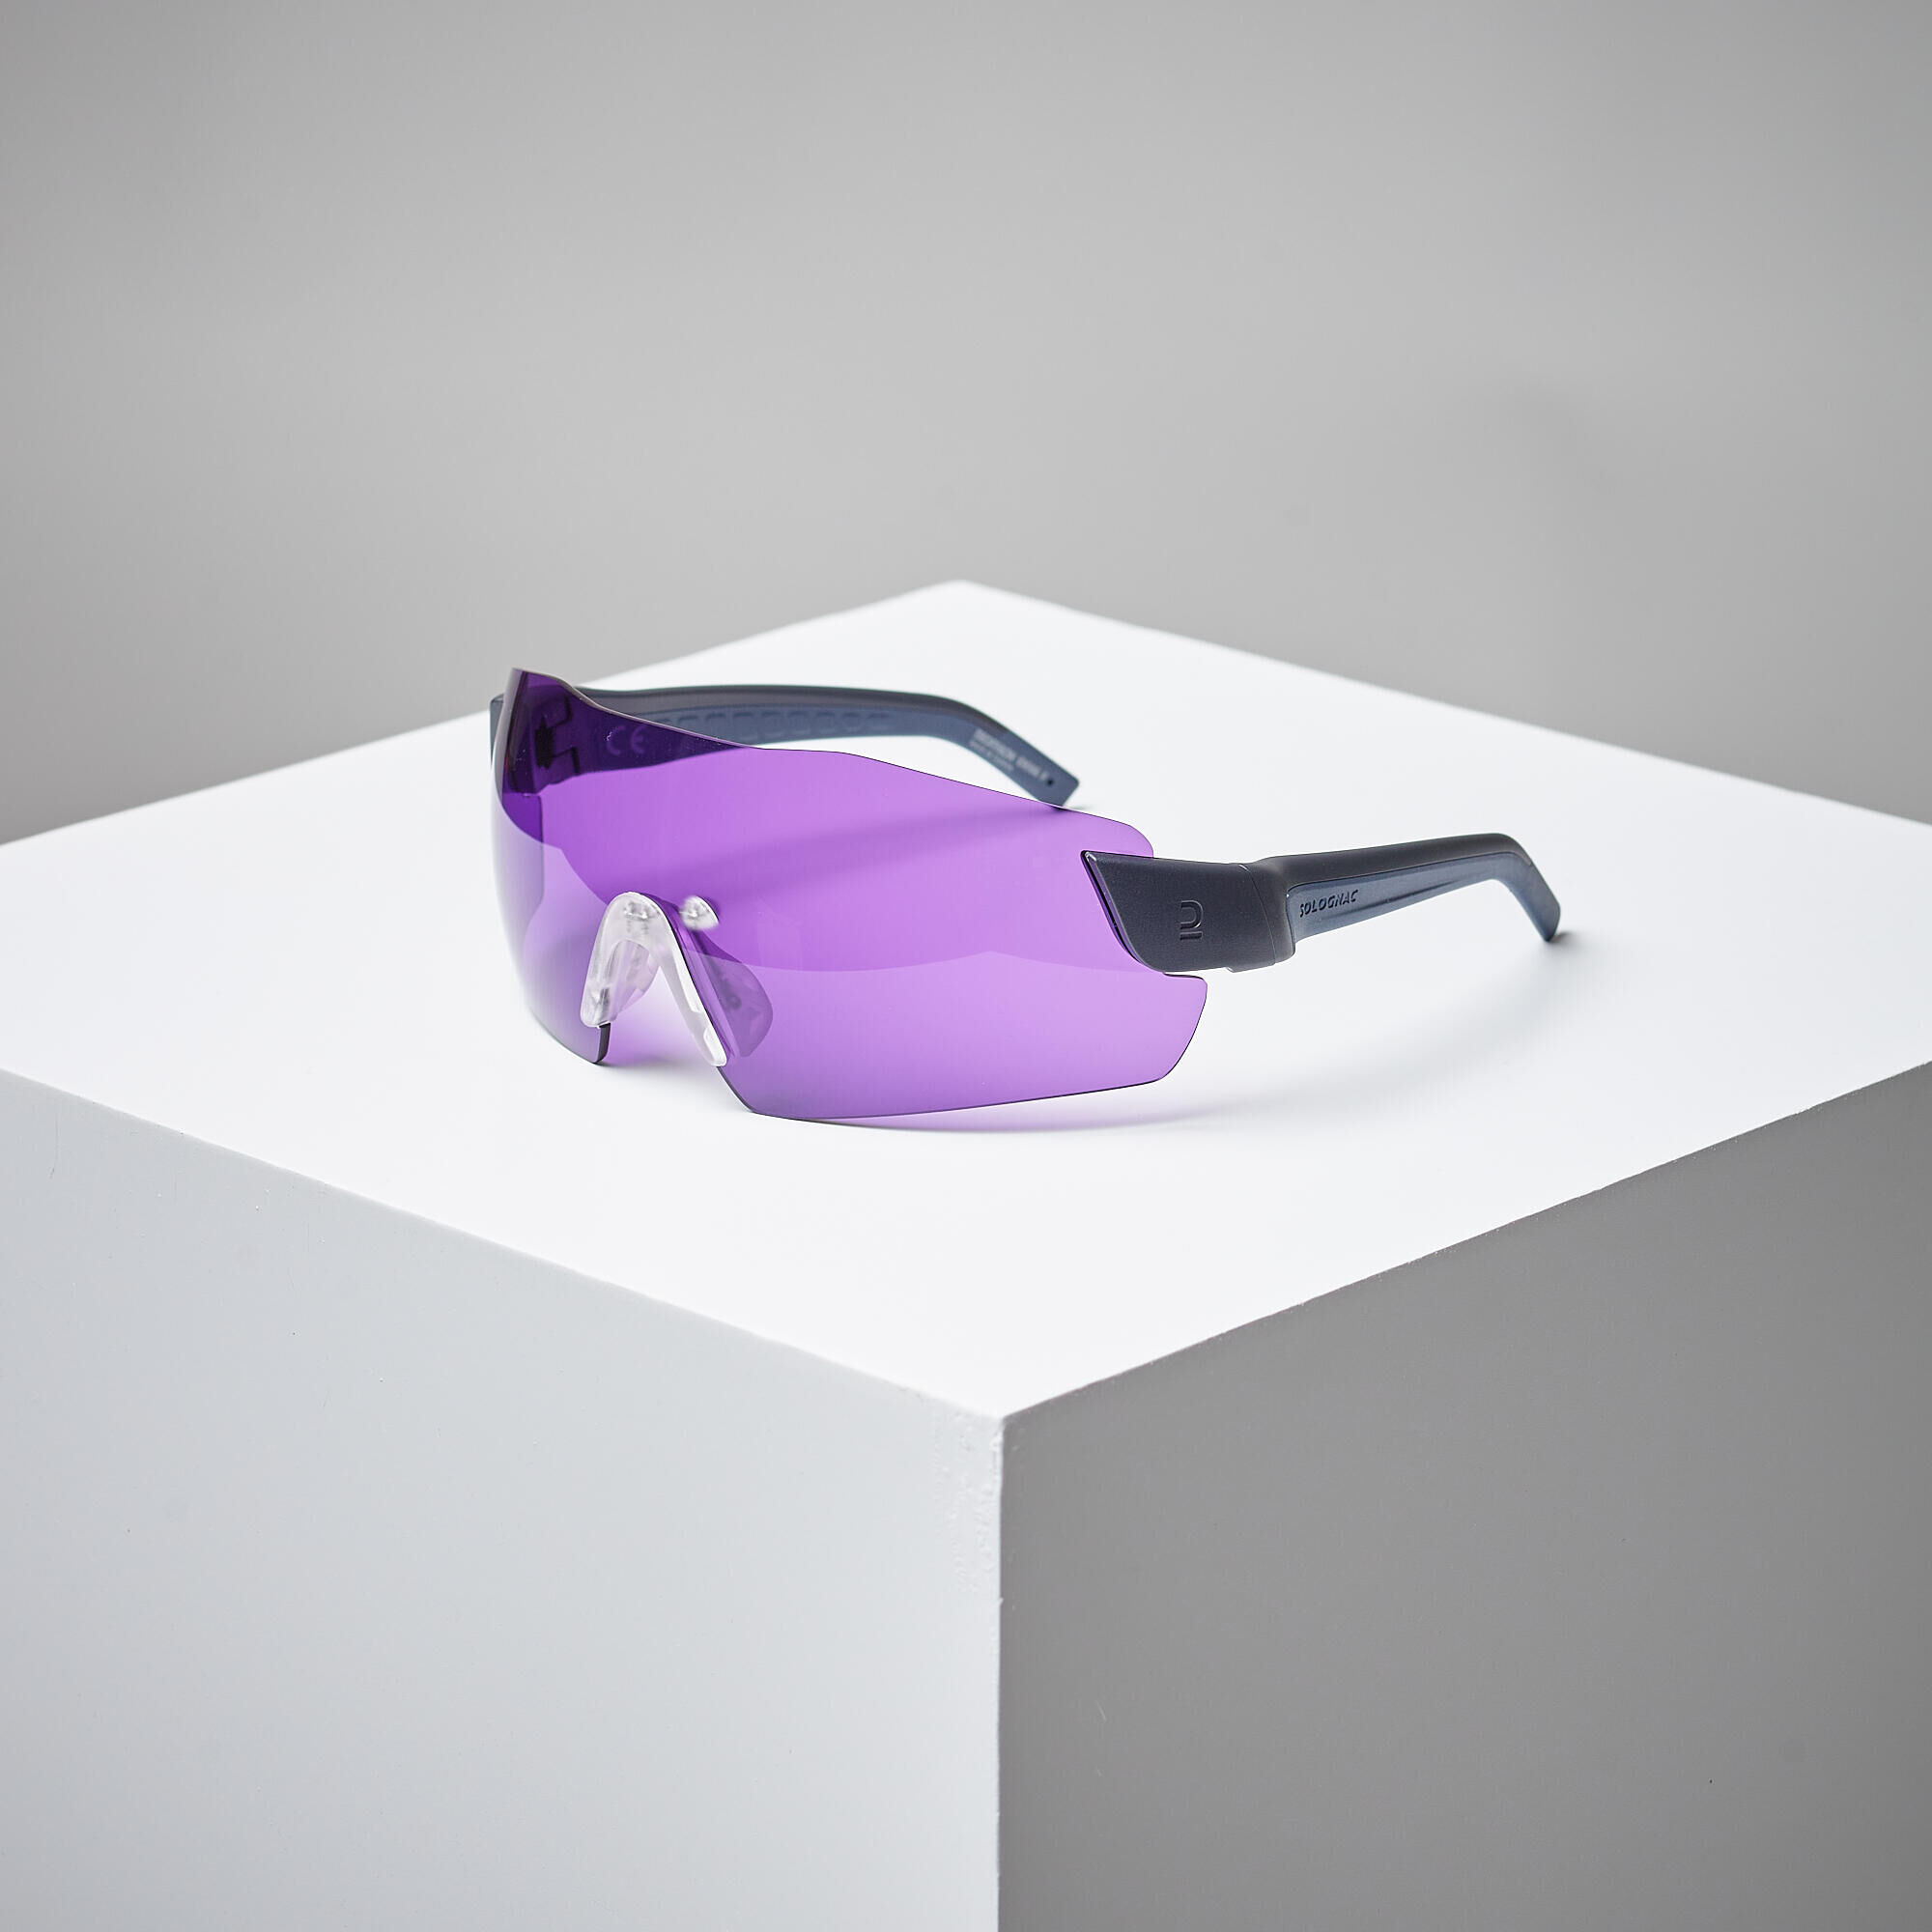 SOLOGNAC SAFETY GLASSES FOR CLAY PIGEON SHOOTING 500 PURPLE CATEGORY 3